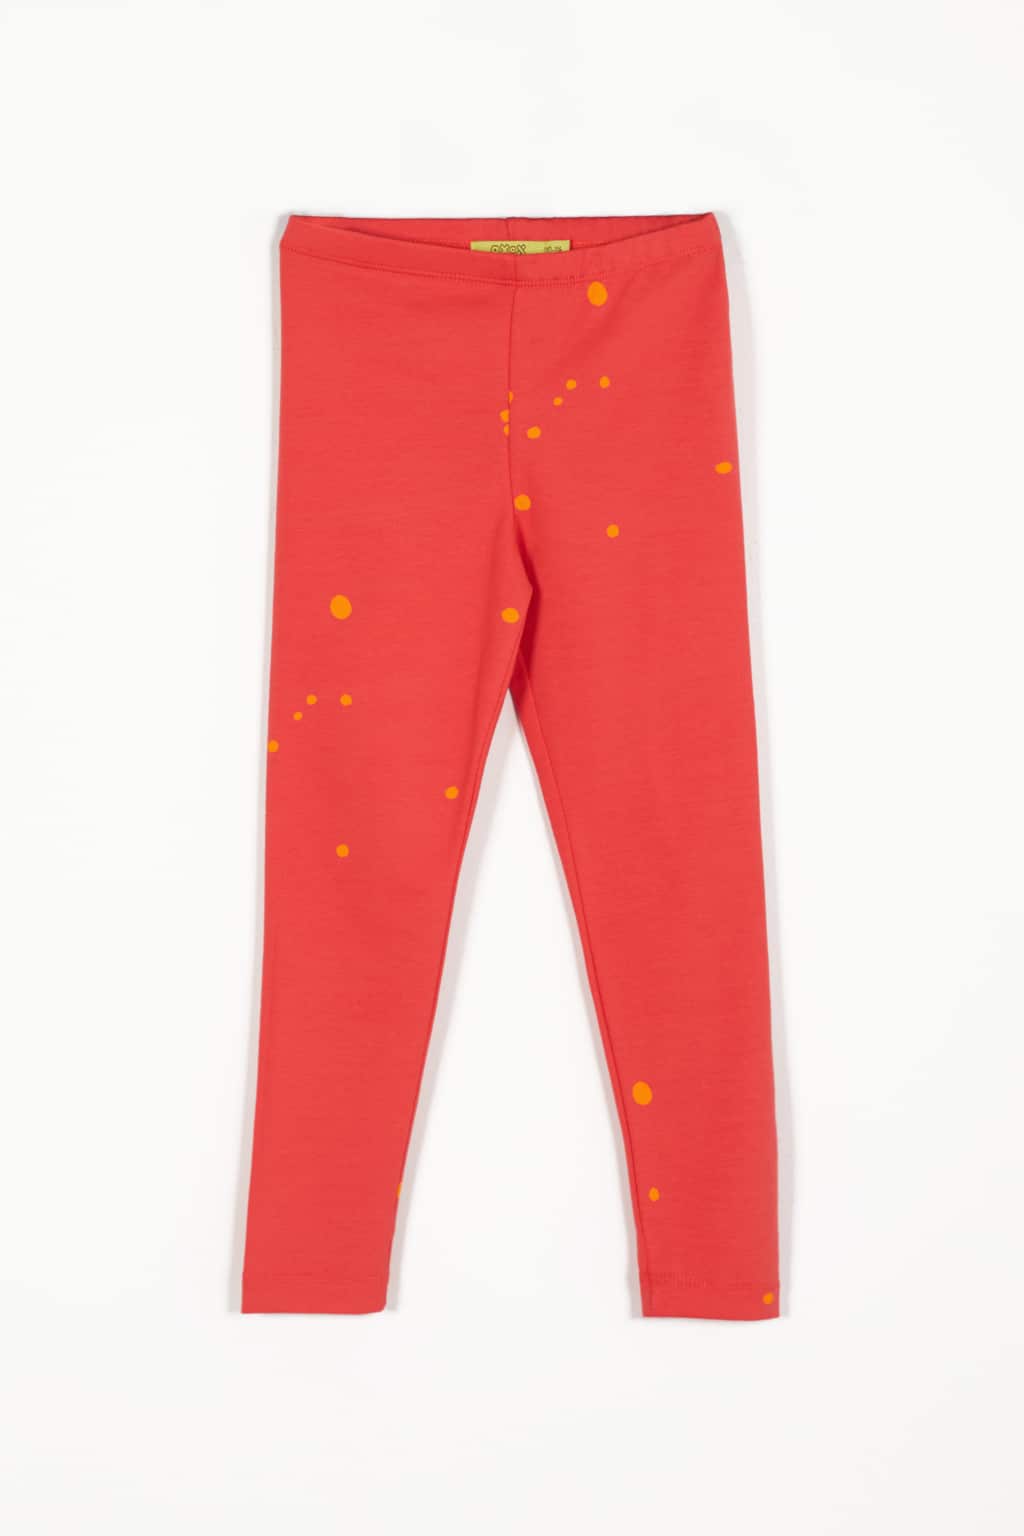 Casual yet very playful leggings with fun dots pattern, made from elasticized cotton, provide effortless comfort for daily routines.